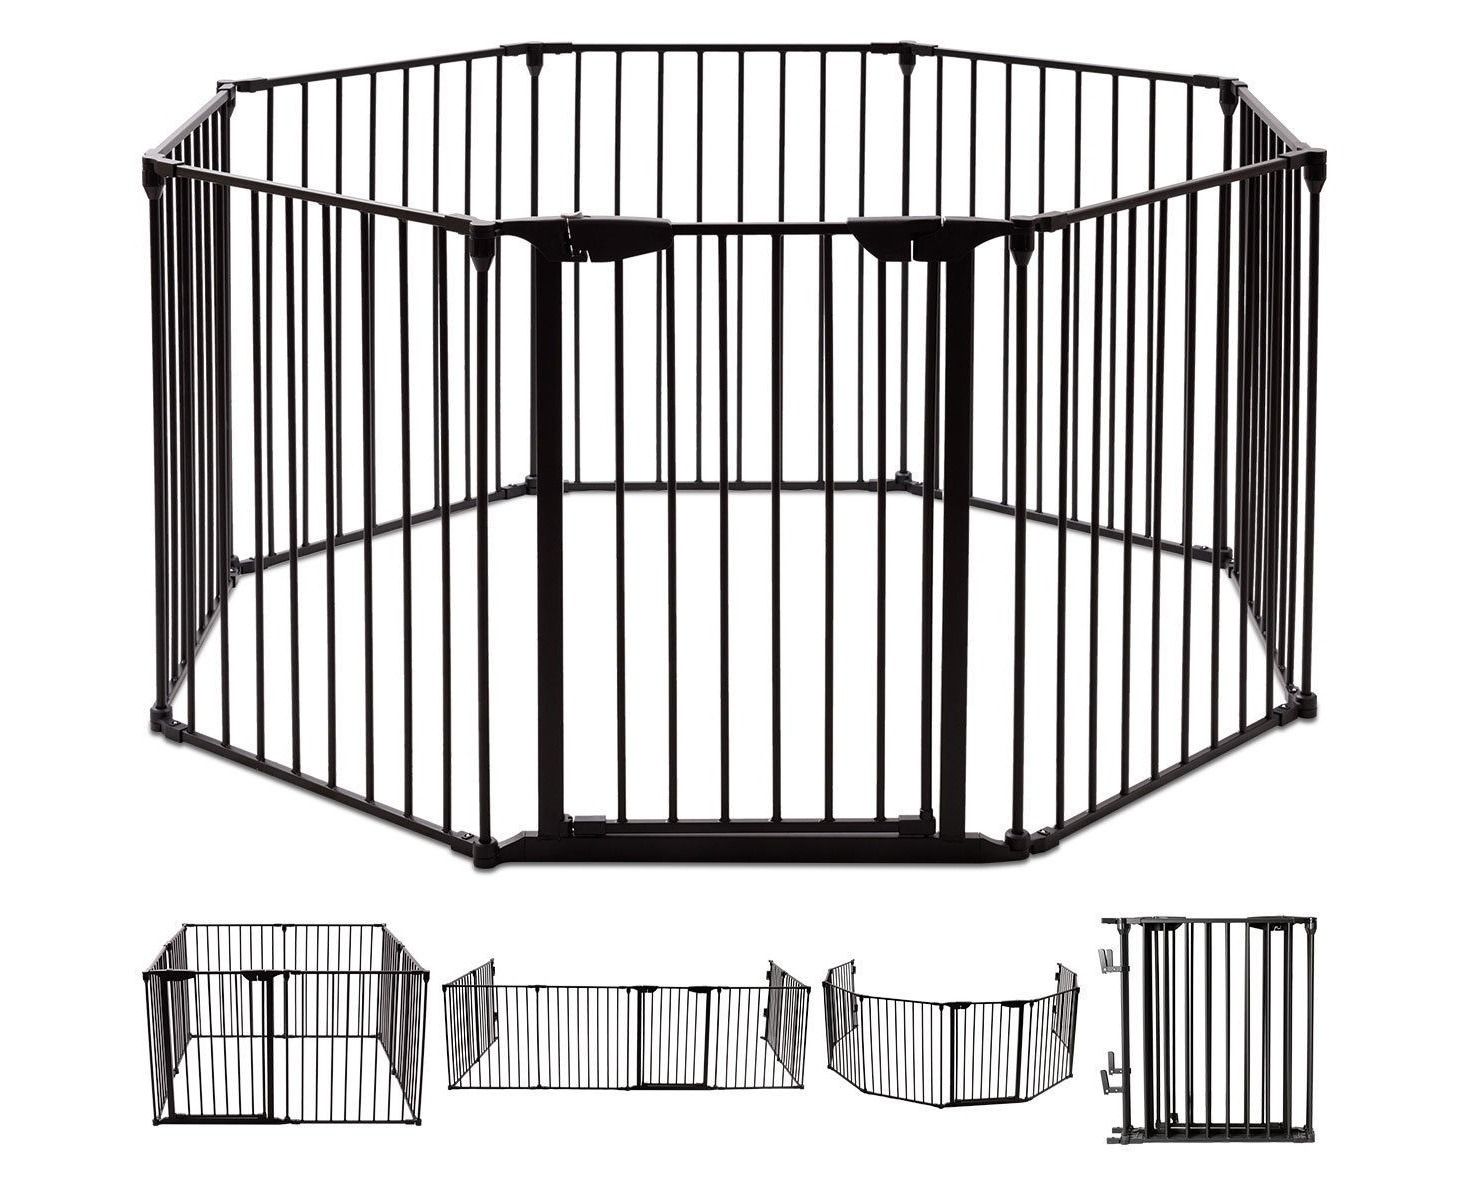 Fireplace Child Gate Lovely 4 In 1 Pet Fence Metal Foldable Gate Baby Fireplace Fence